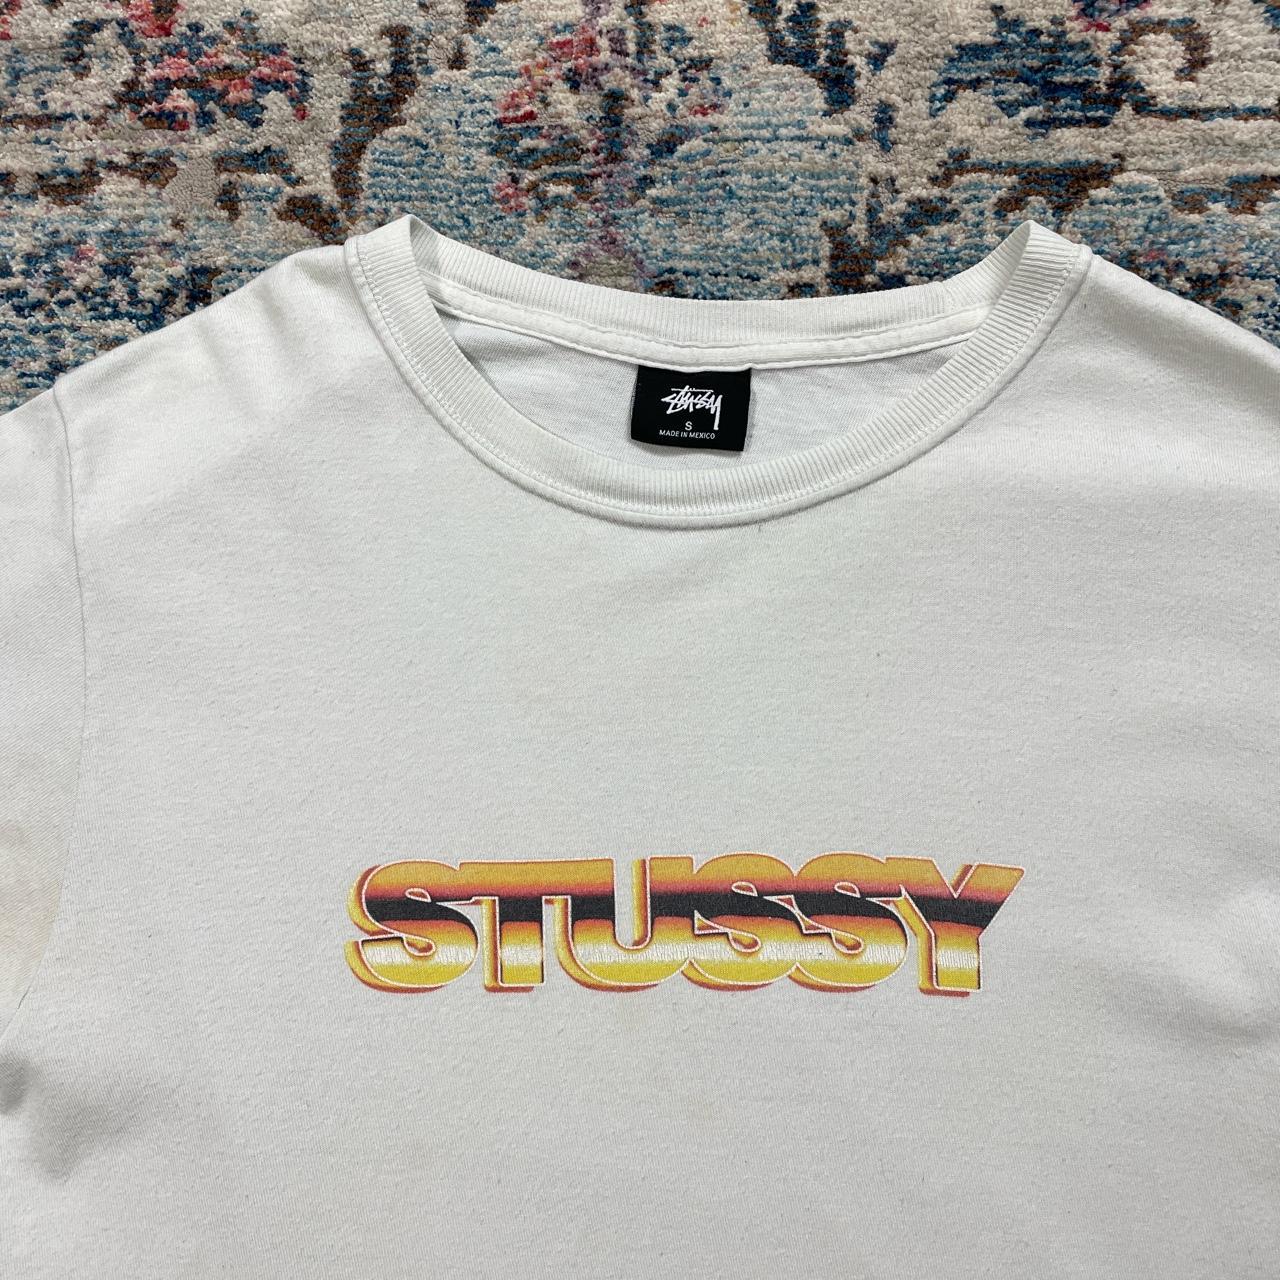 Stussy White Spellout T-Shirt